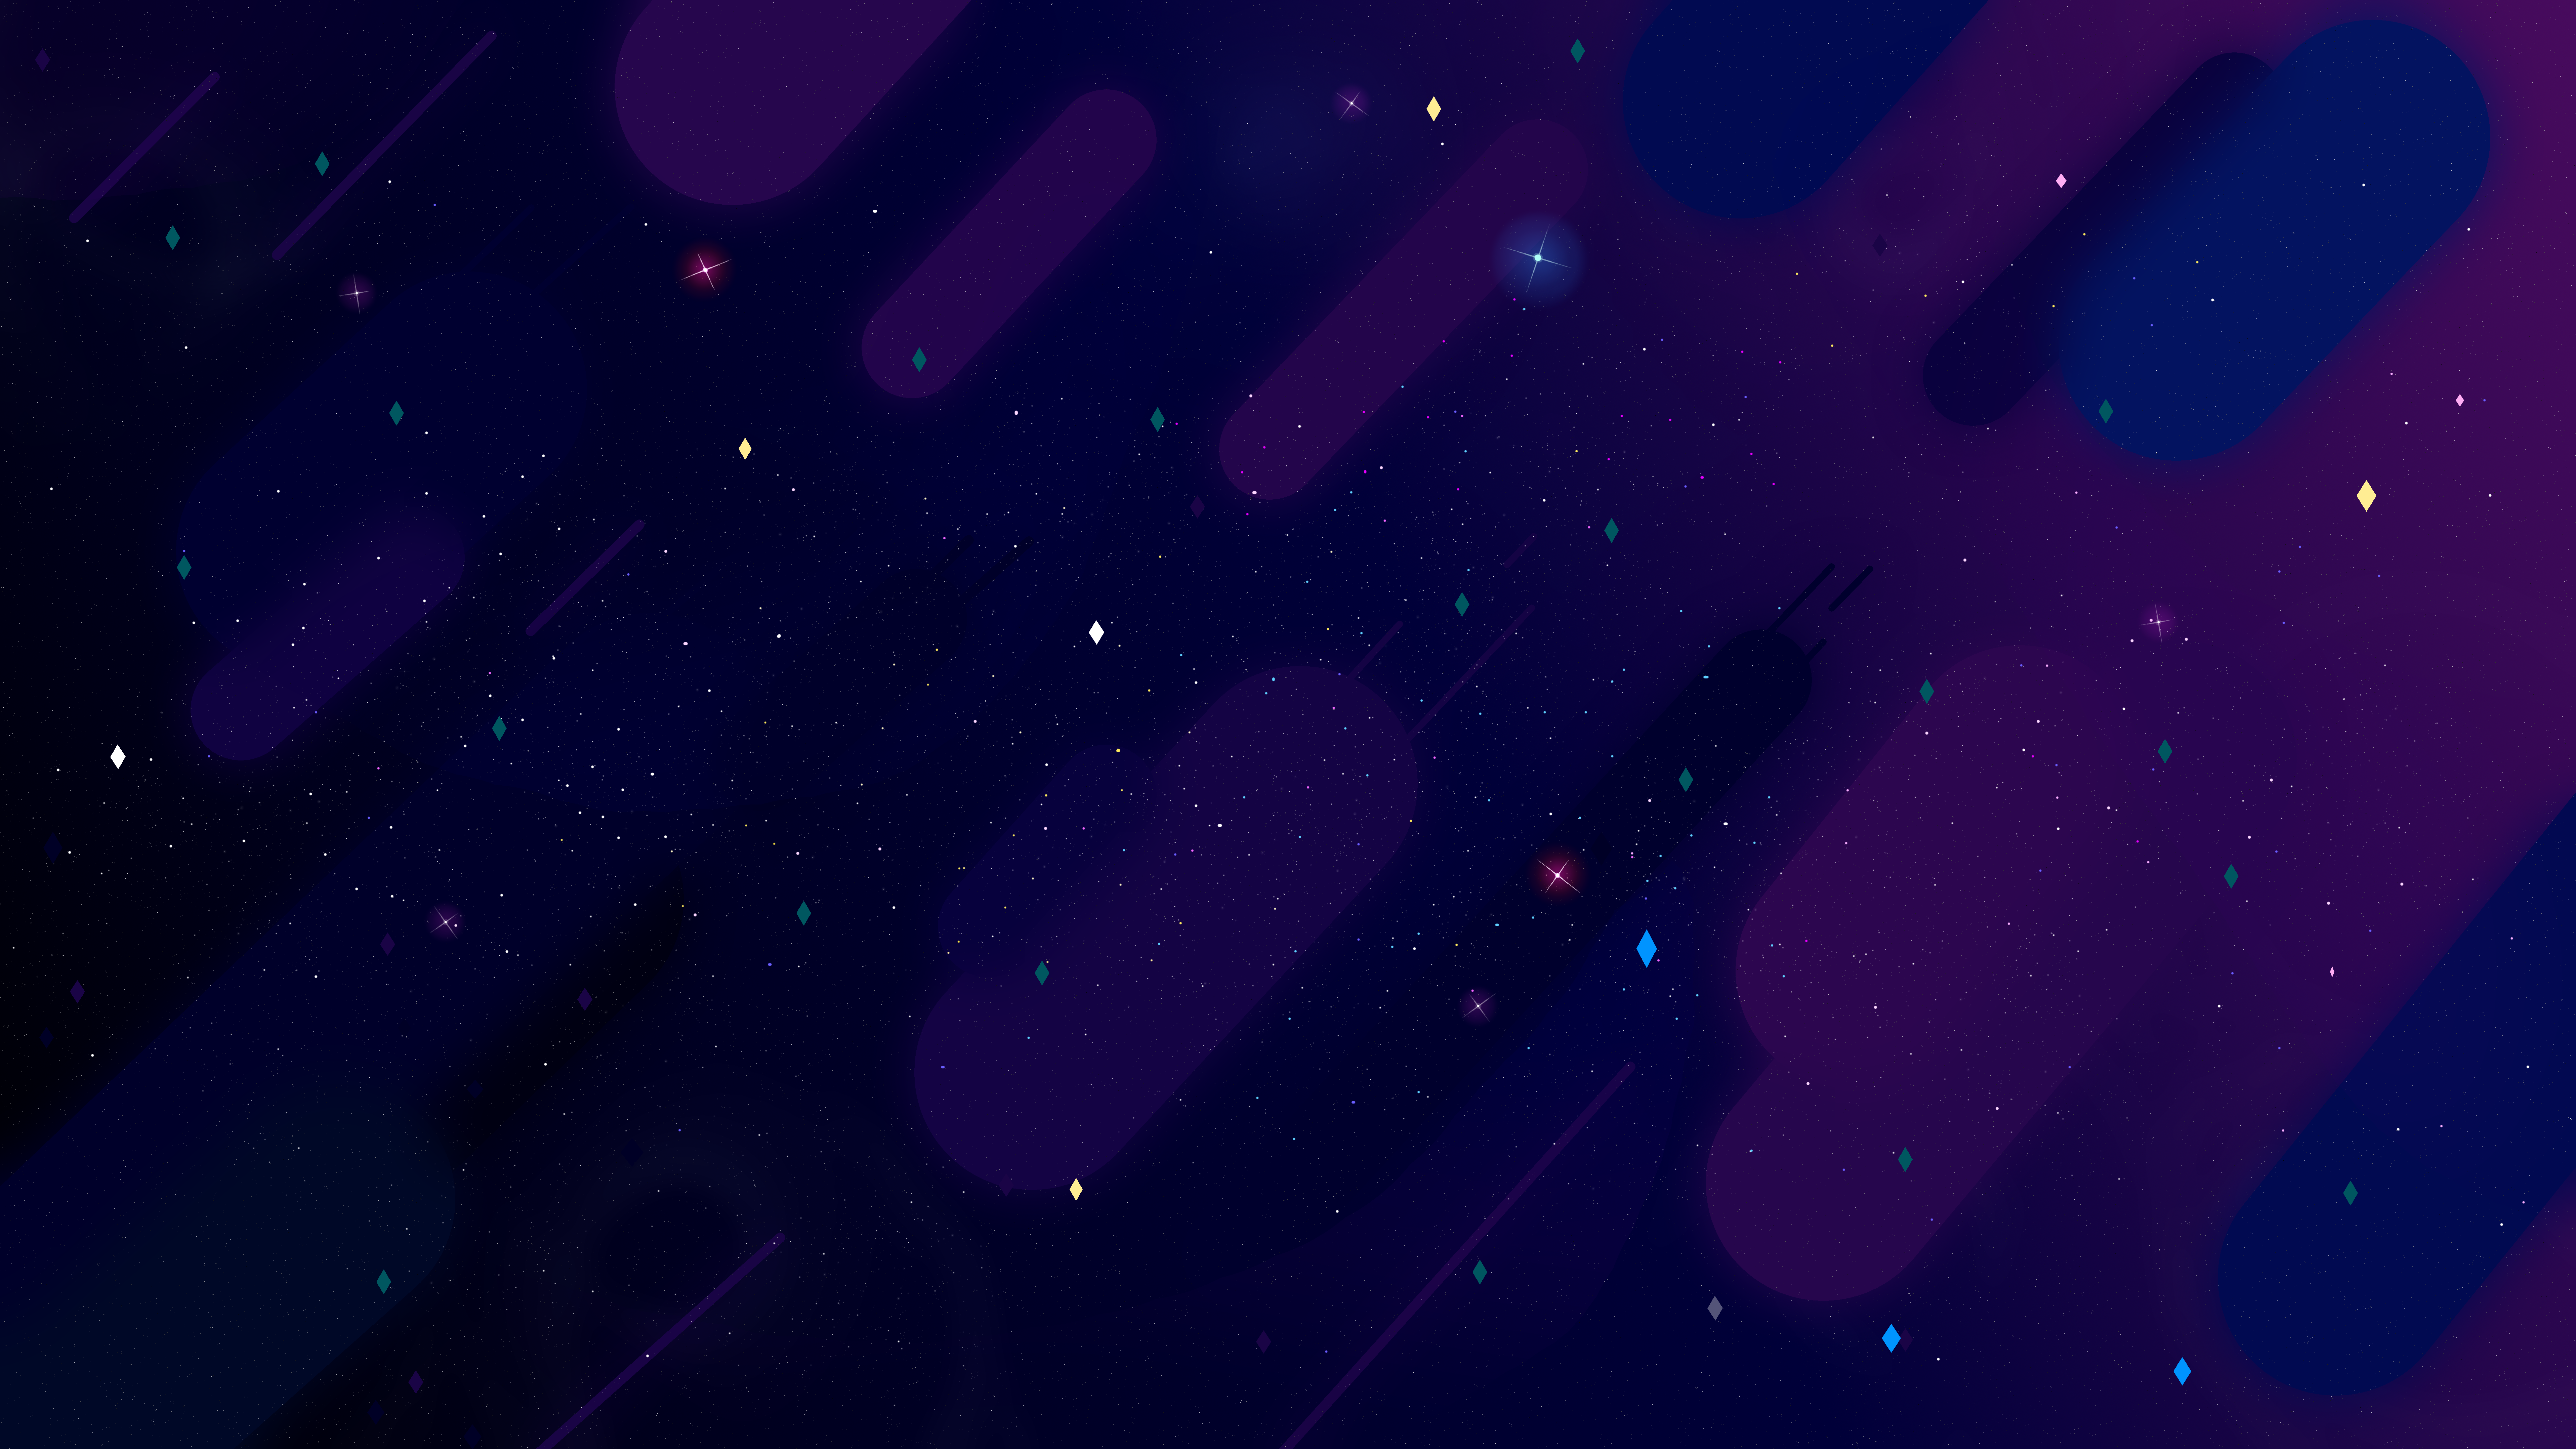 A Steven Universe Style Space Background I Made For My